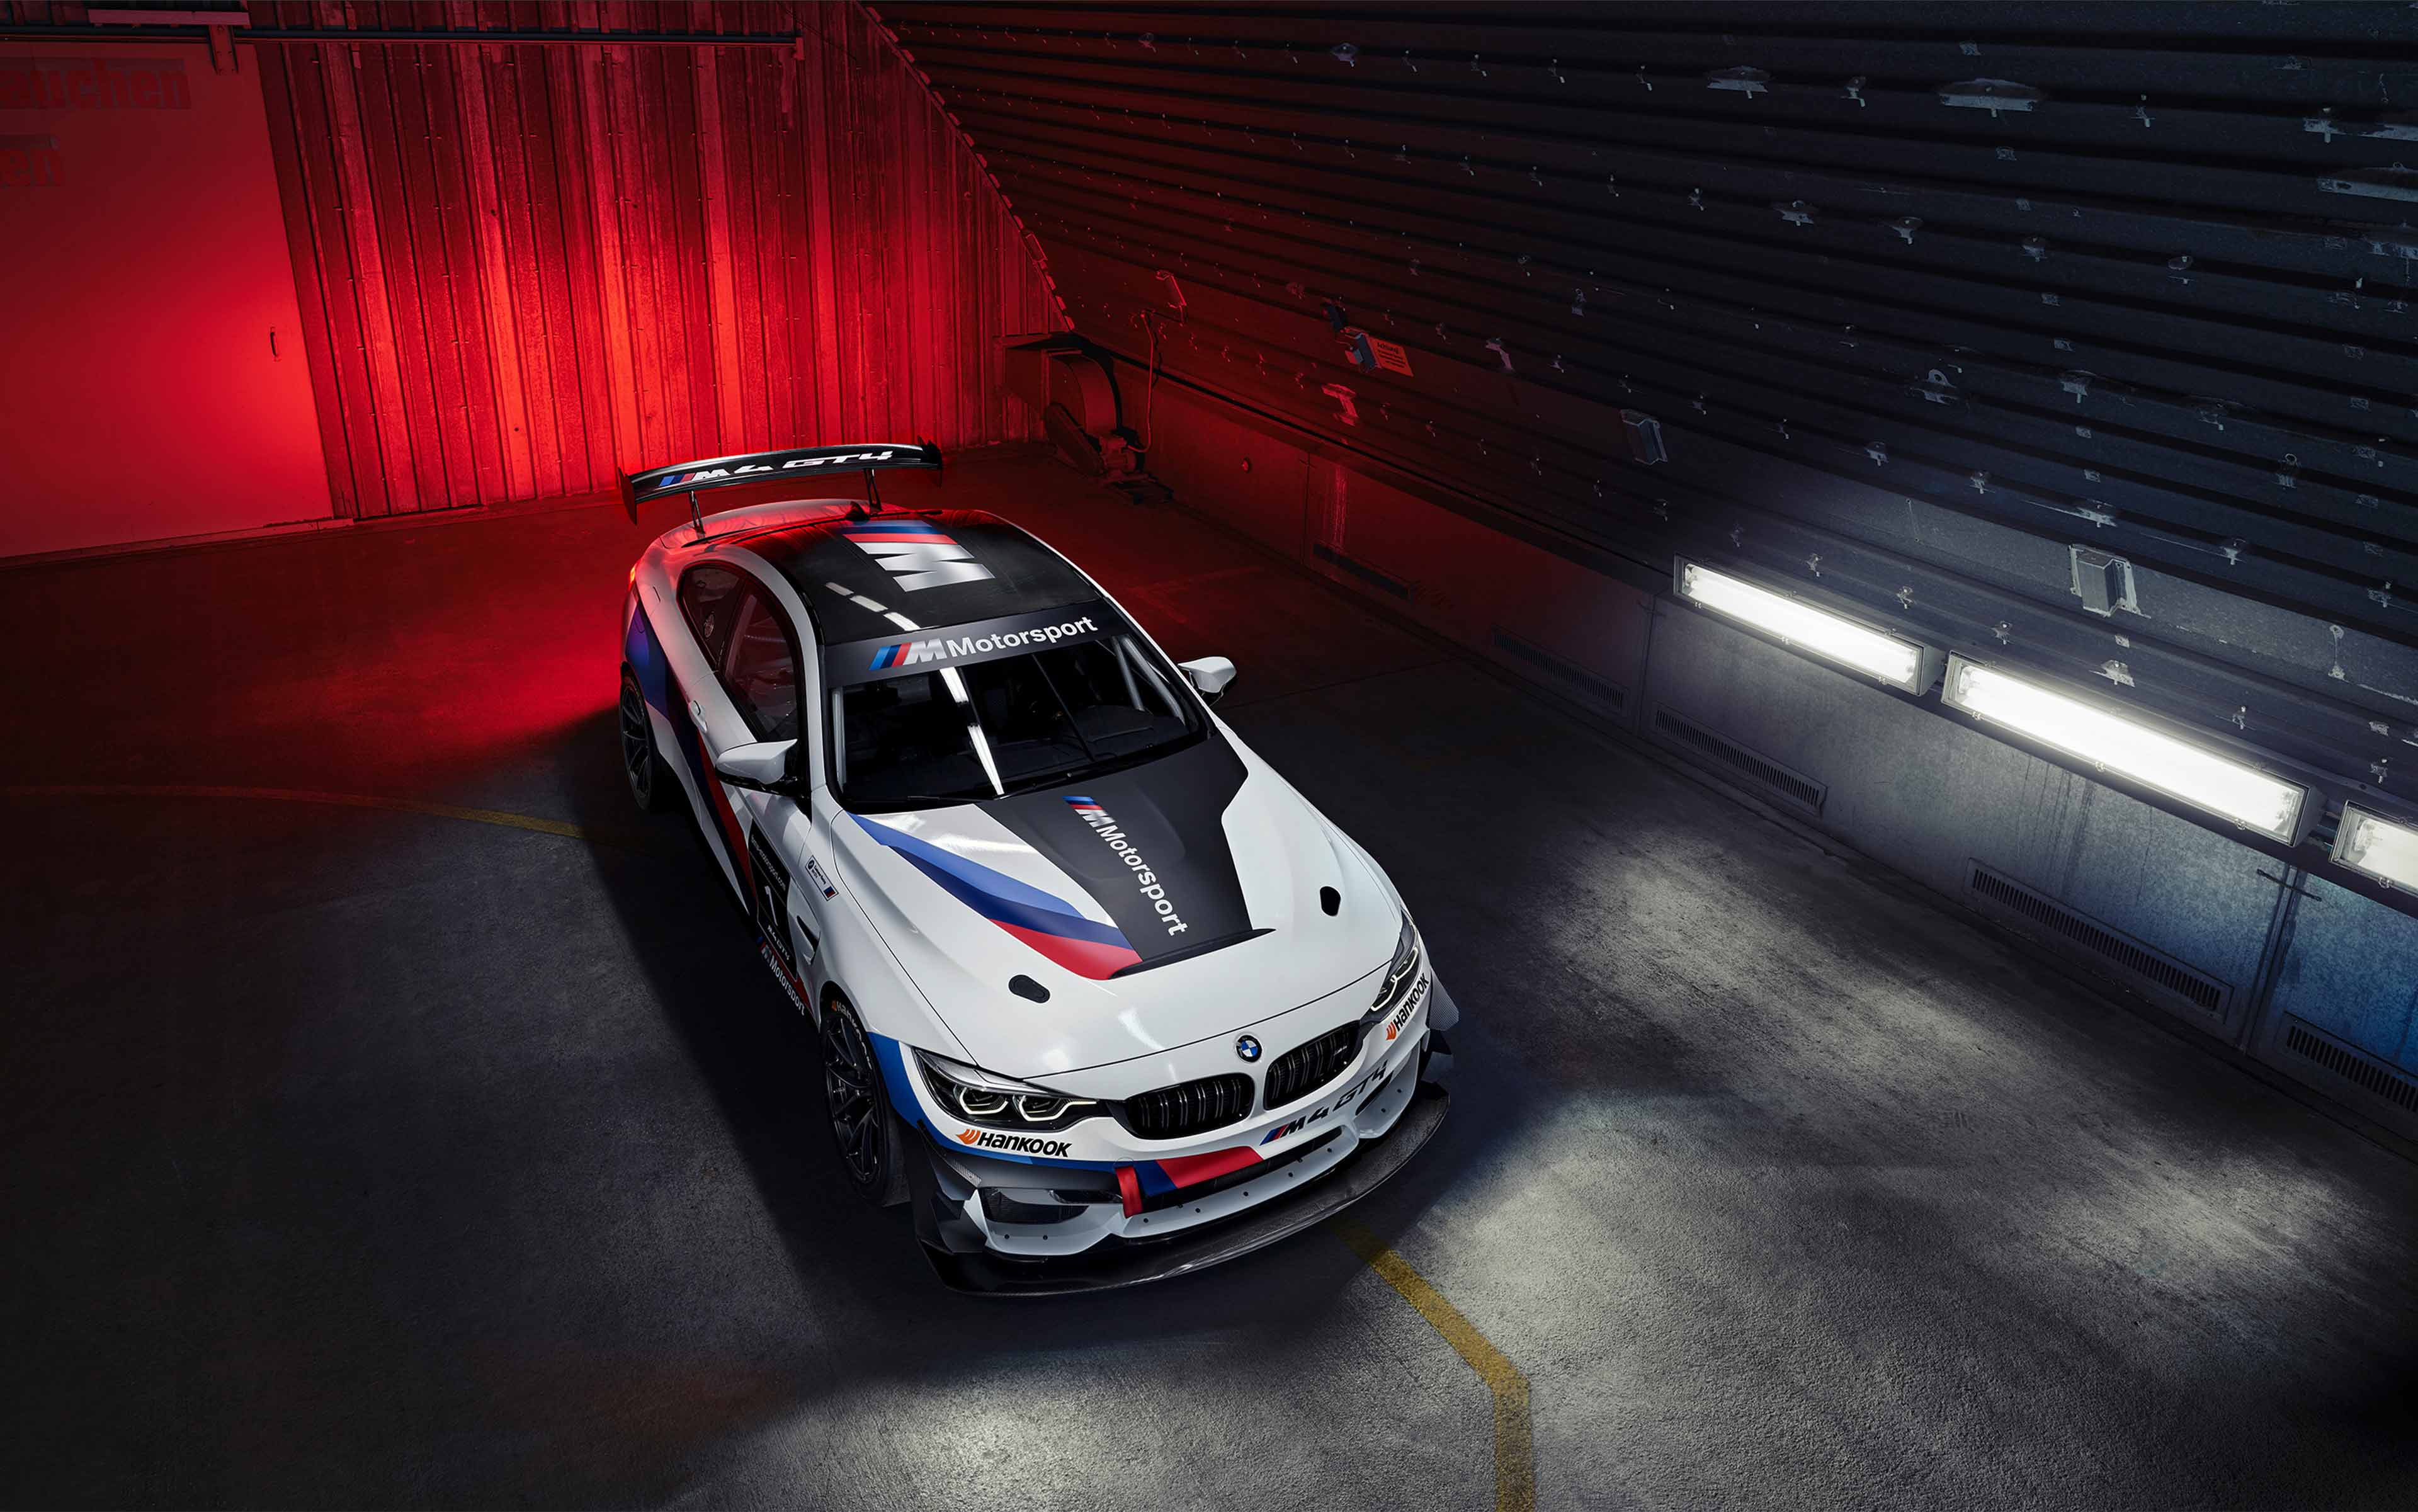 4K Bmw Wallpapers